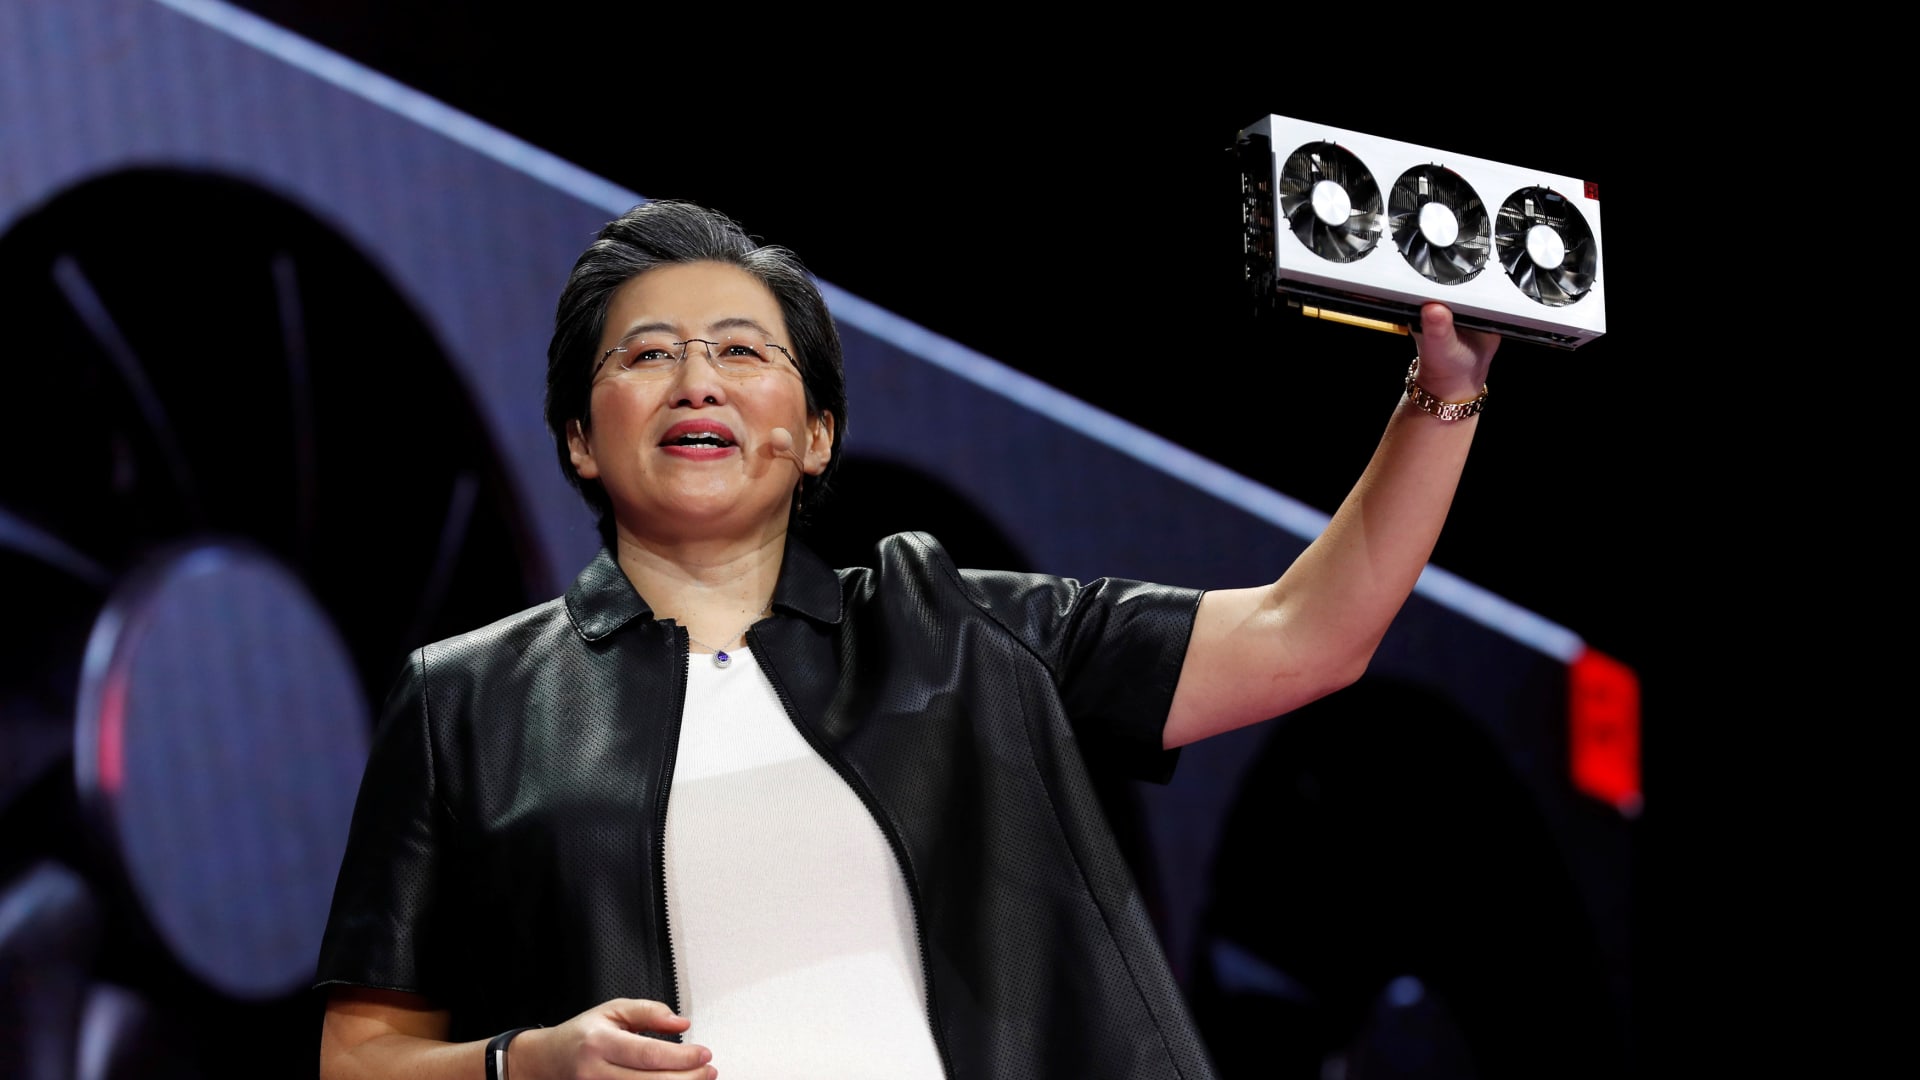 AMD’s data center business grew 80% but the stock is down